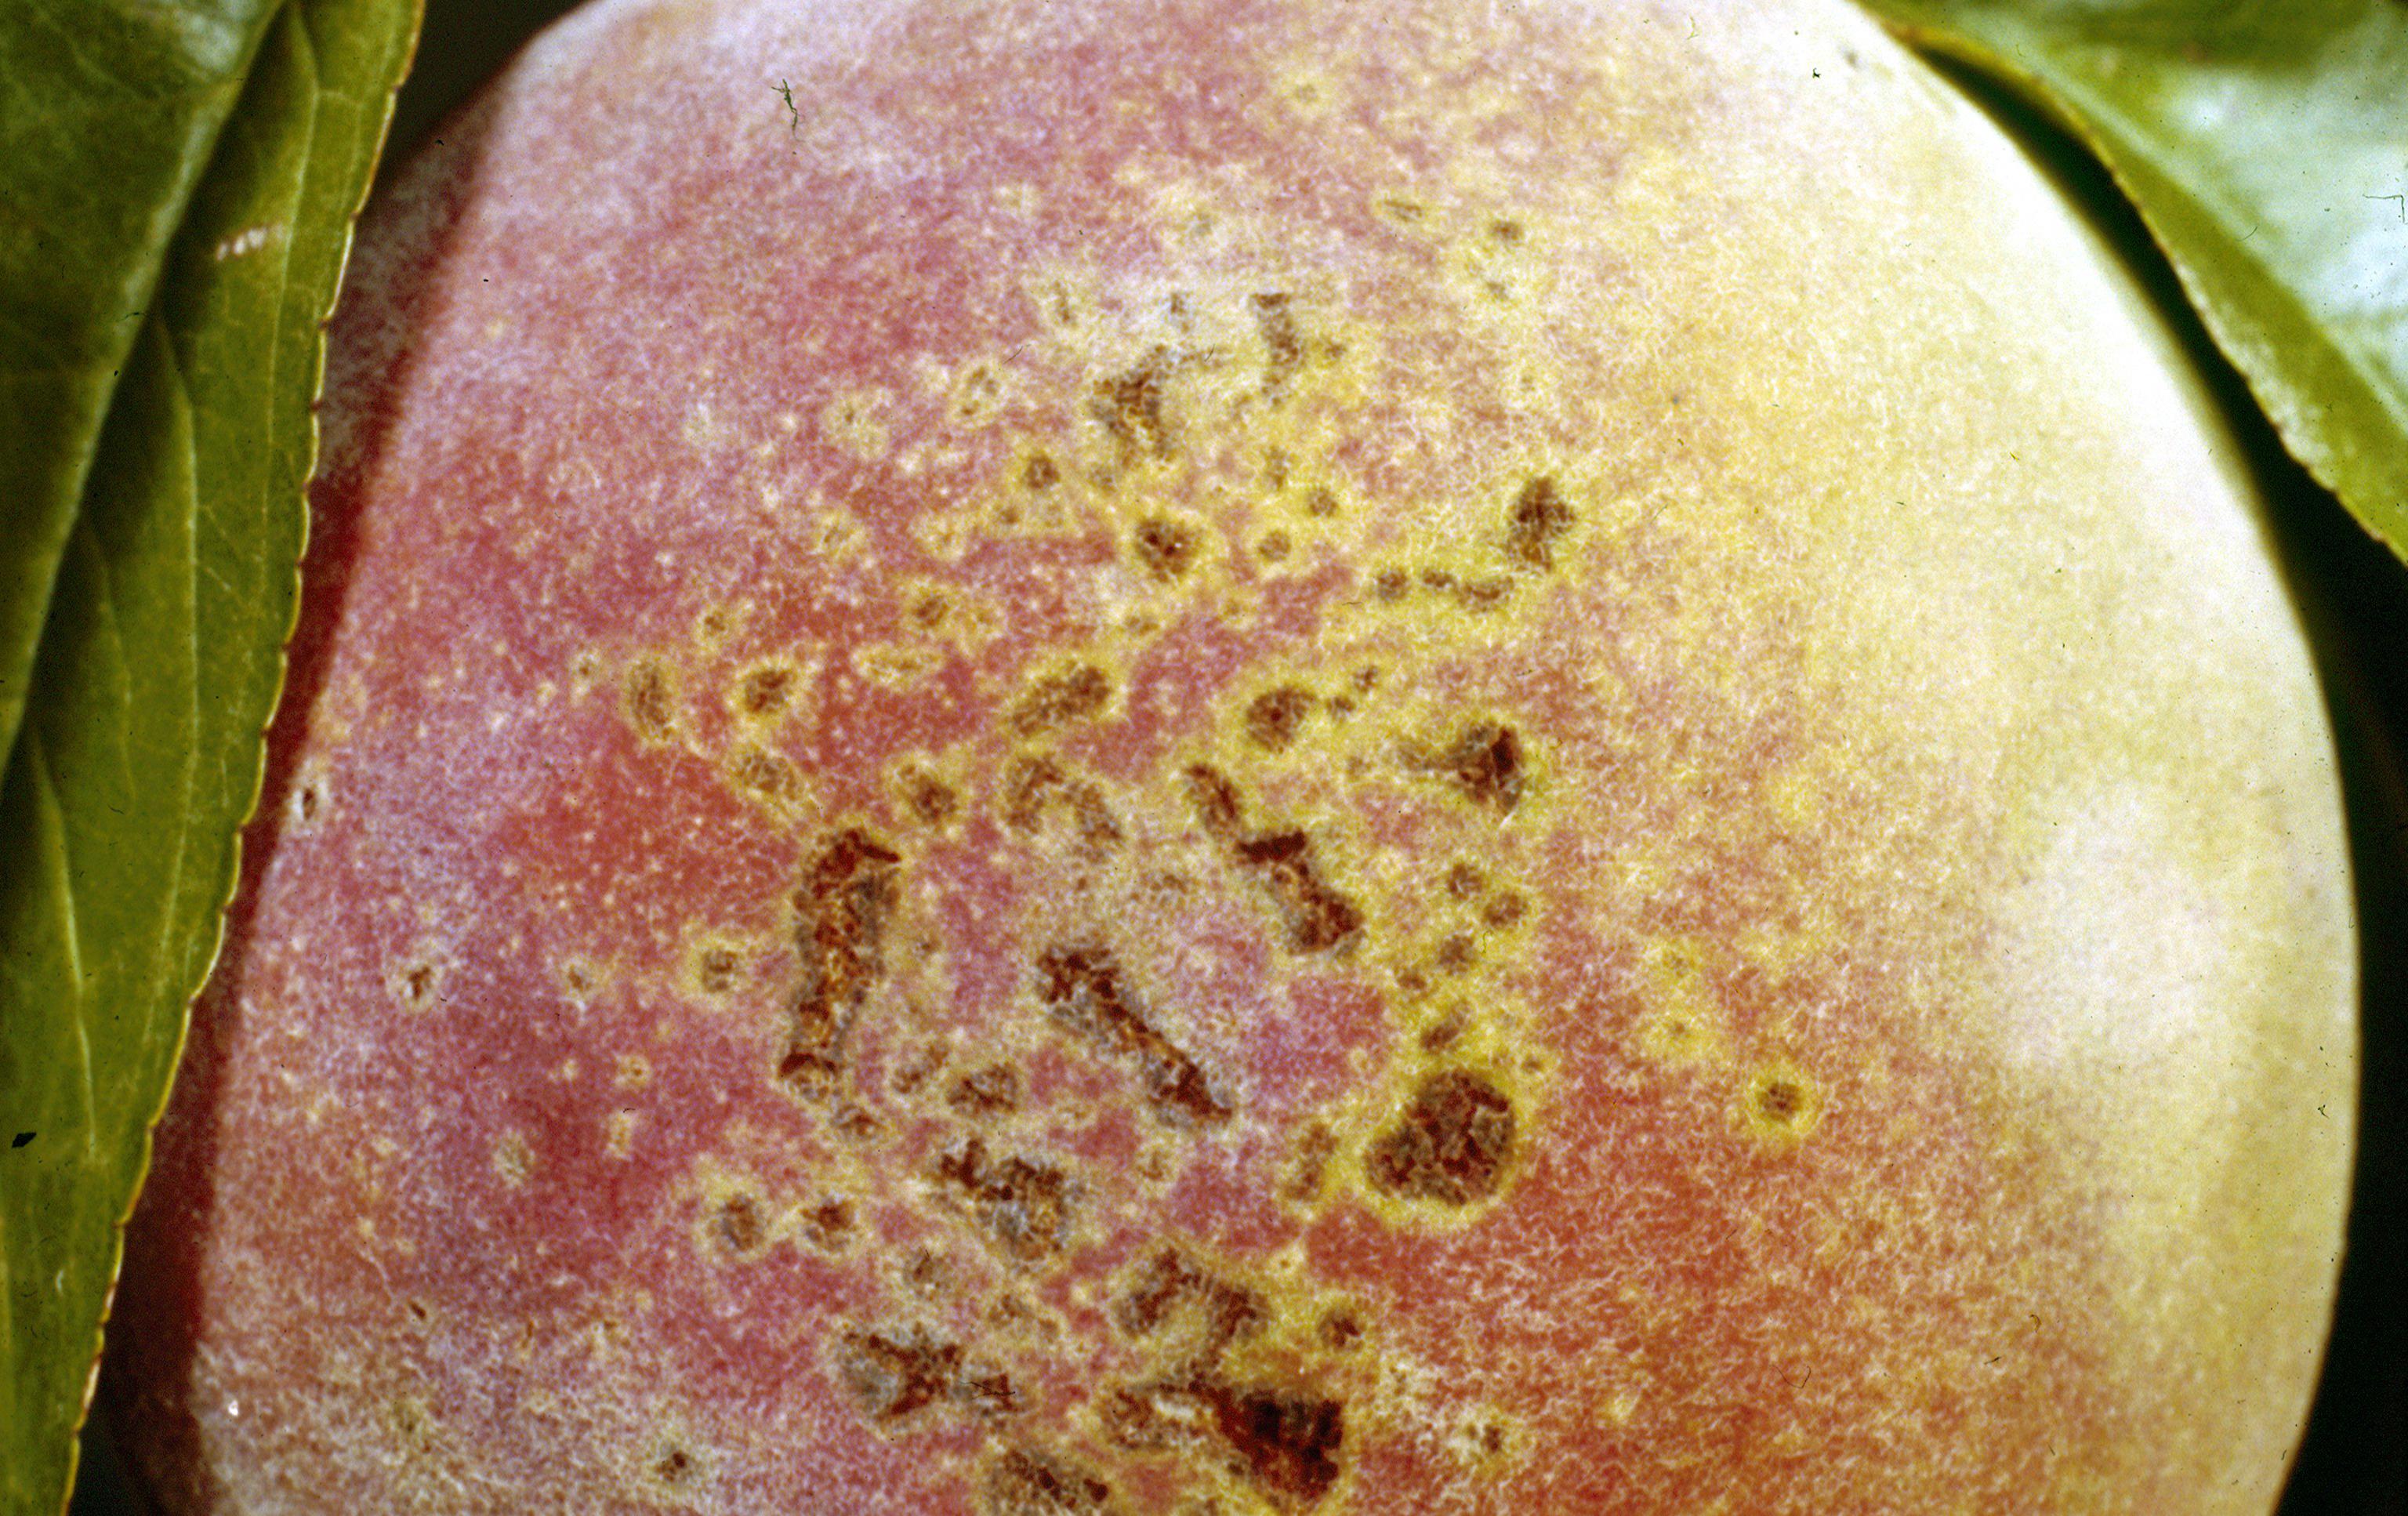 Bacterial spot later damage on fruit. 